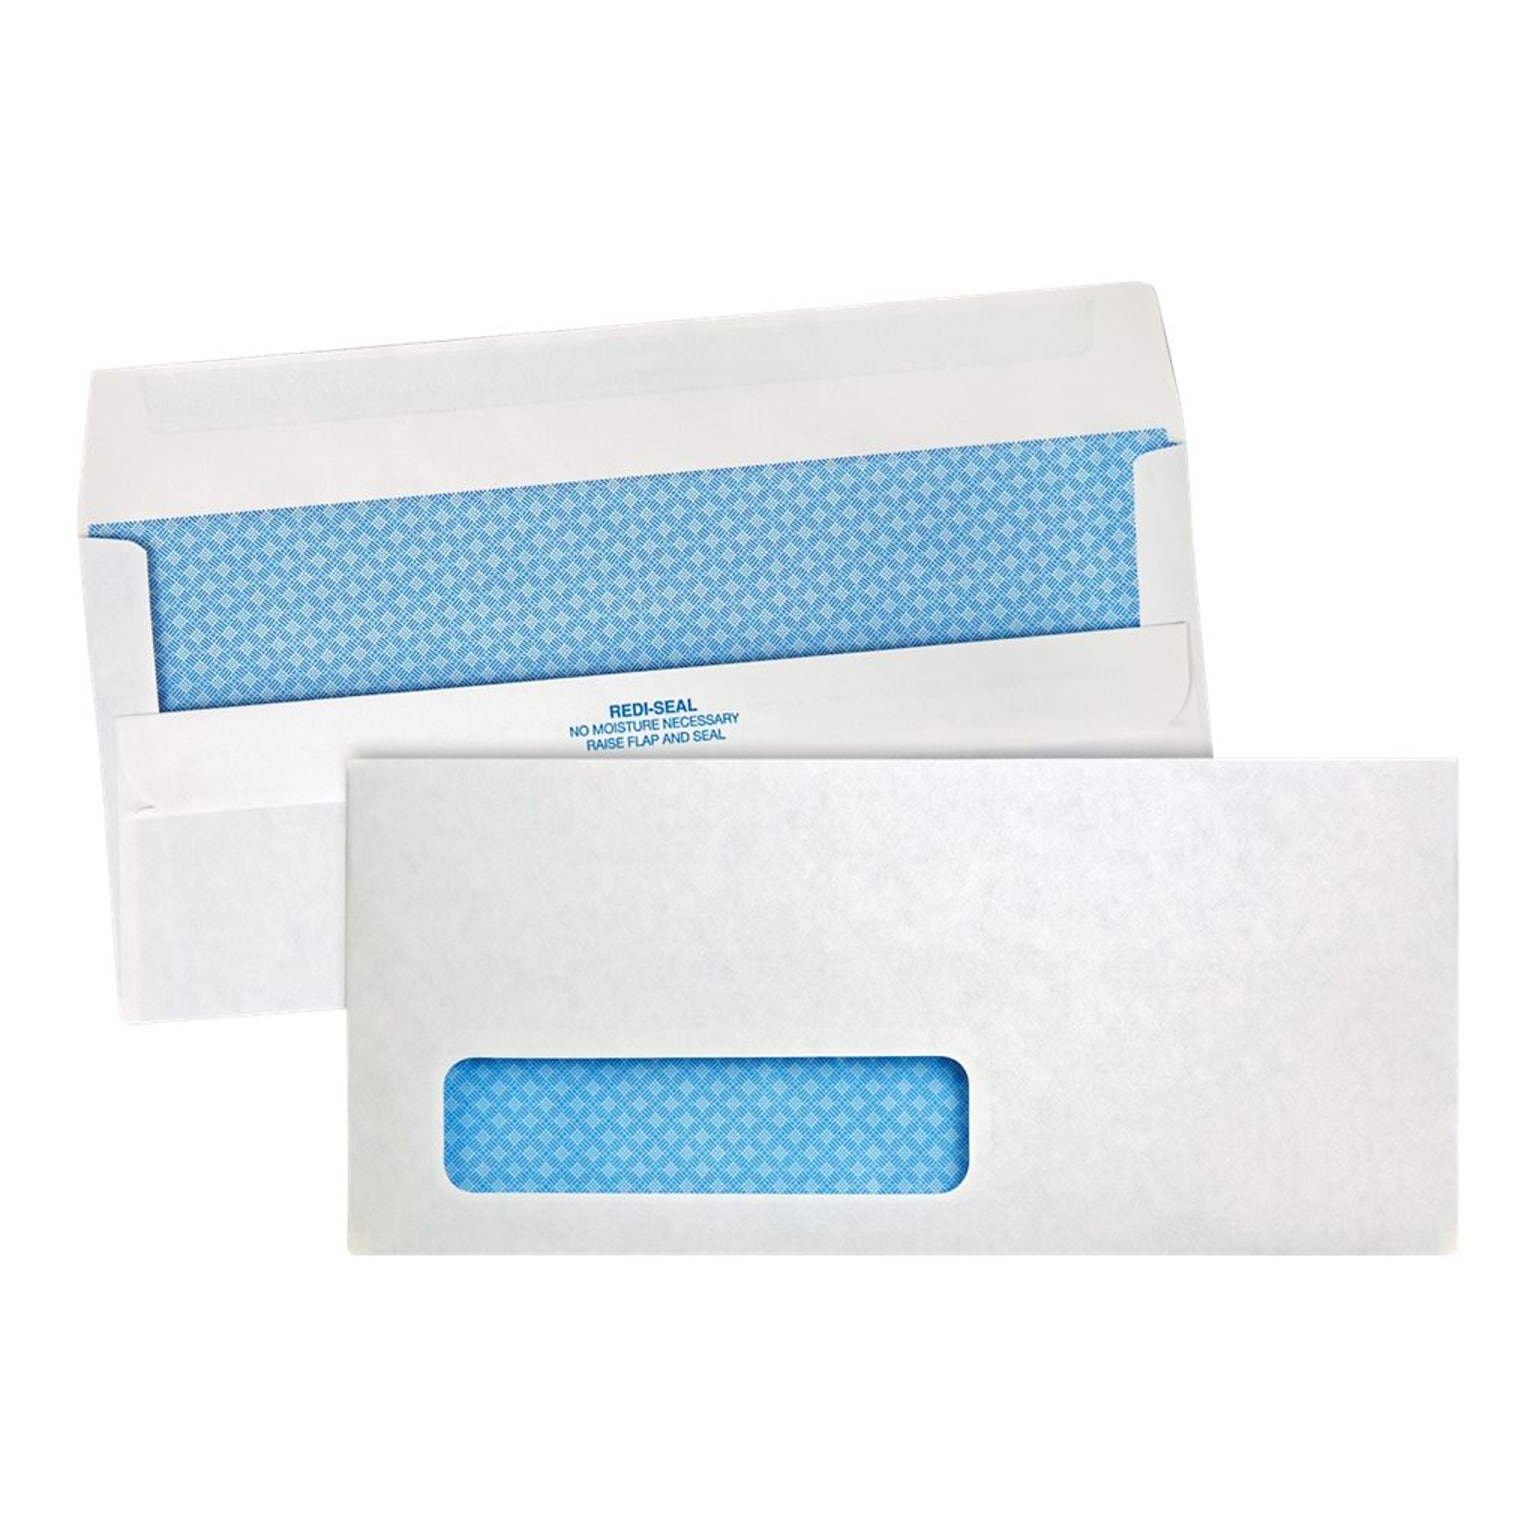 Quality Park Redi-Seal Security Tinted #10 Window Envelope, 4 1/8 x 9 1/2, White Wove, 500/Box (21418)